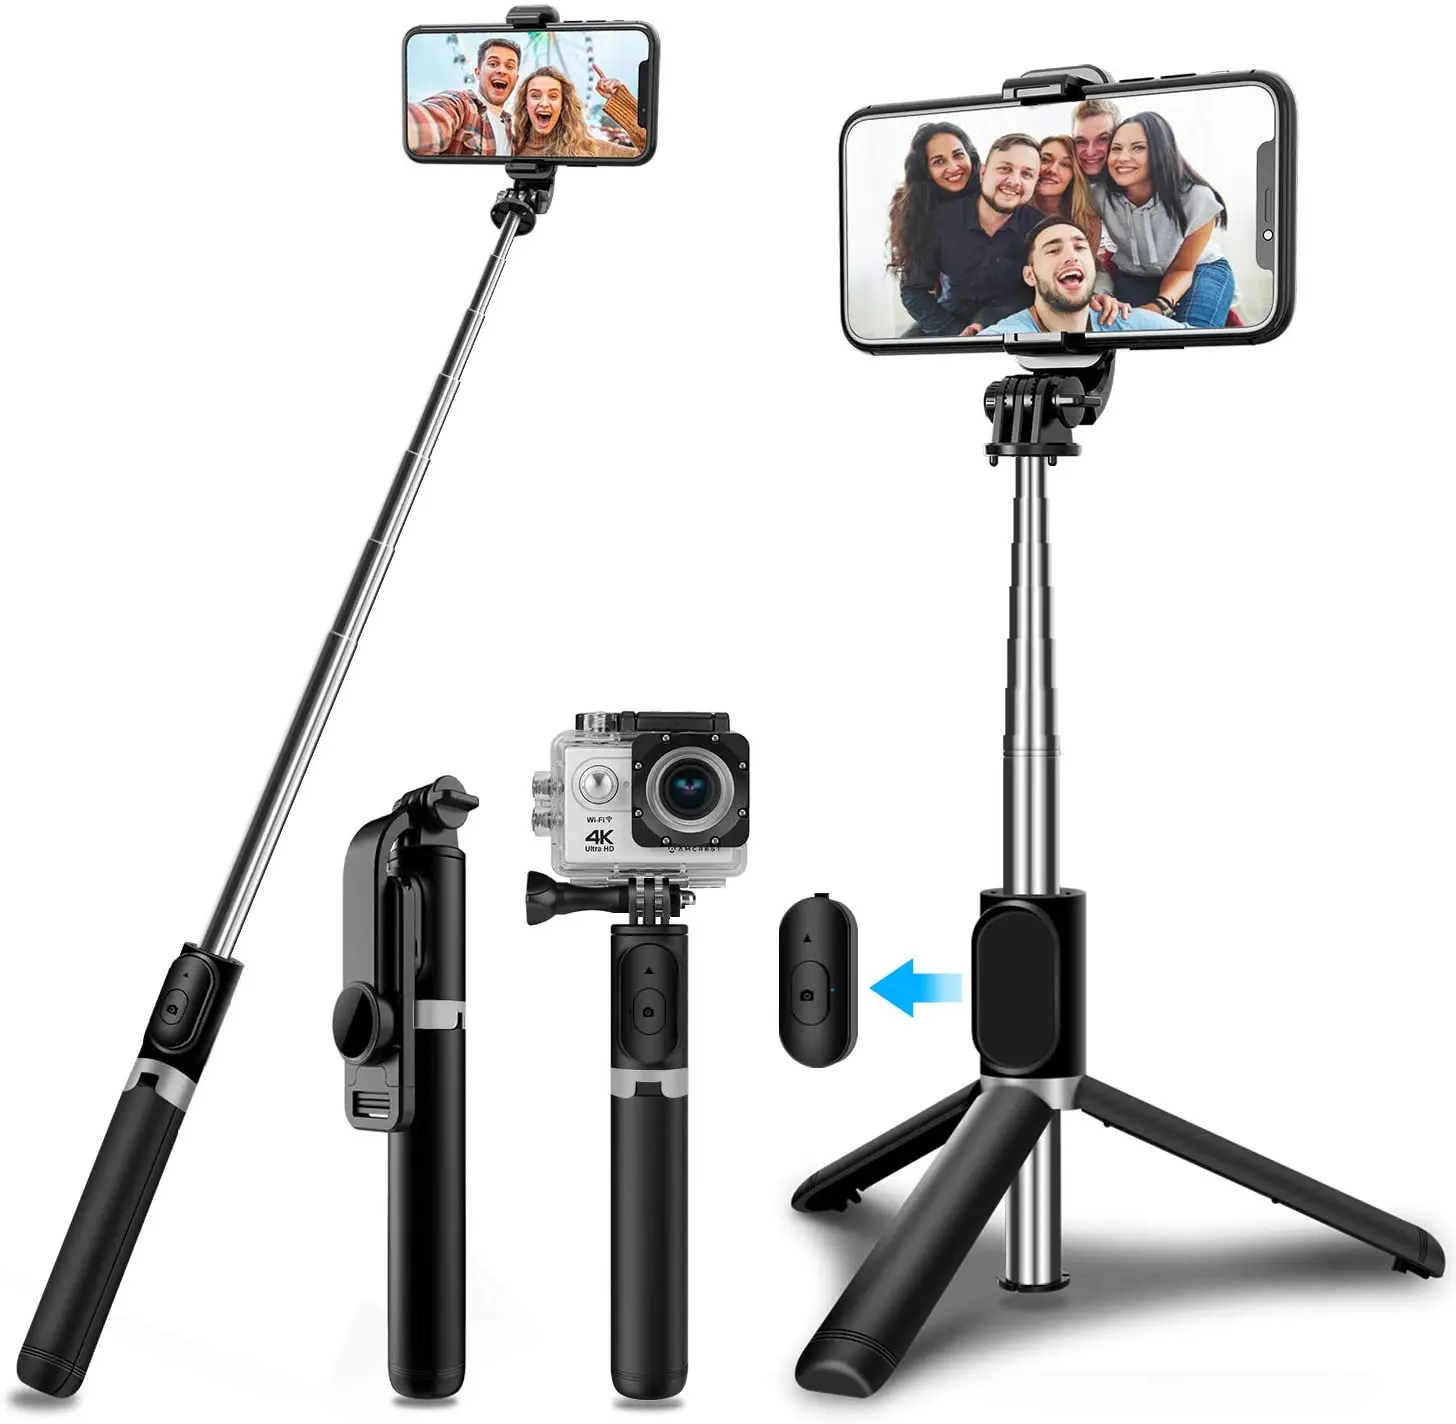 

CYKE Q02 Selfie Stick Tripod with Wireless Remote Mini Extendable 4 in 1 Selfie Stick 103cm 360 Rotation Phone Stand Holder